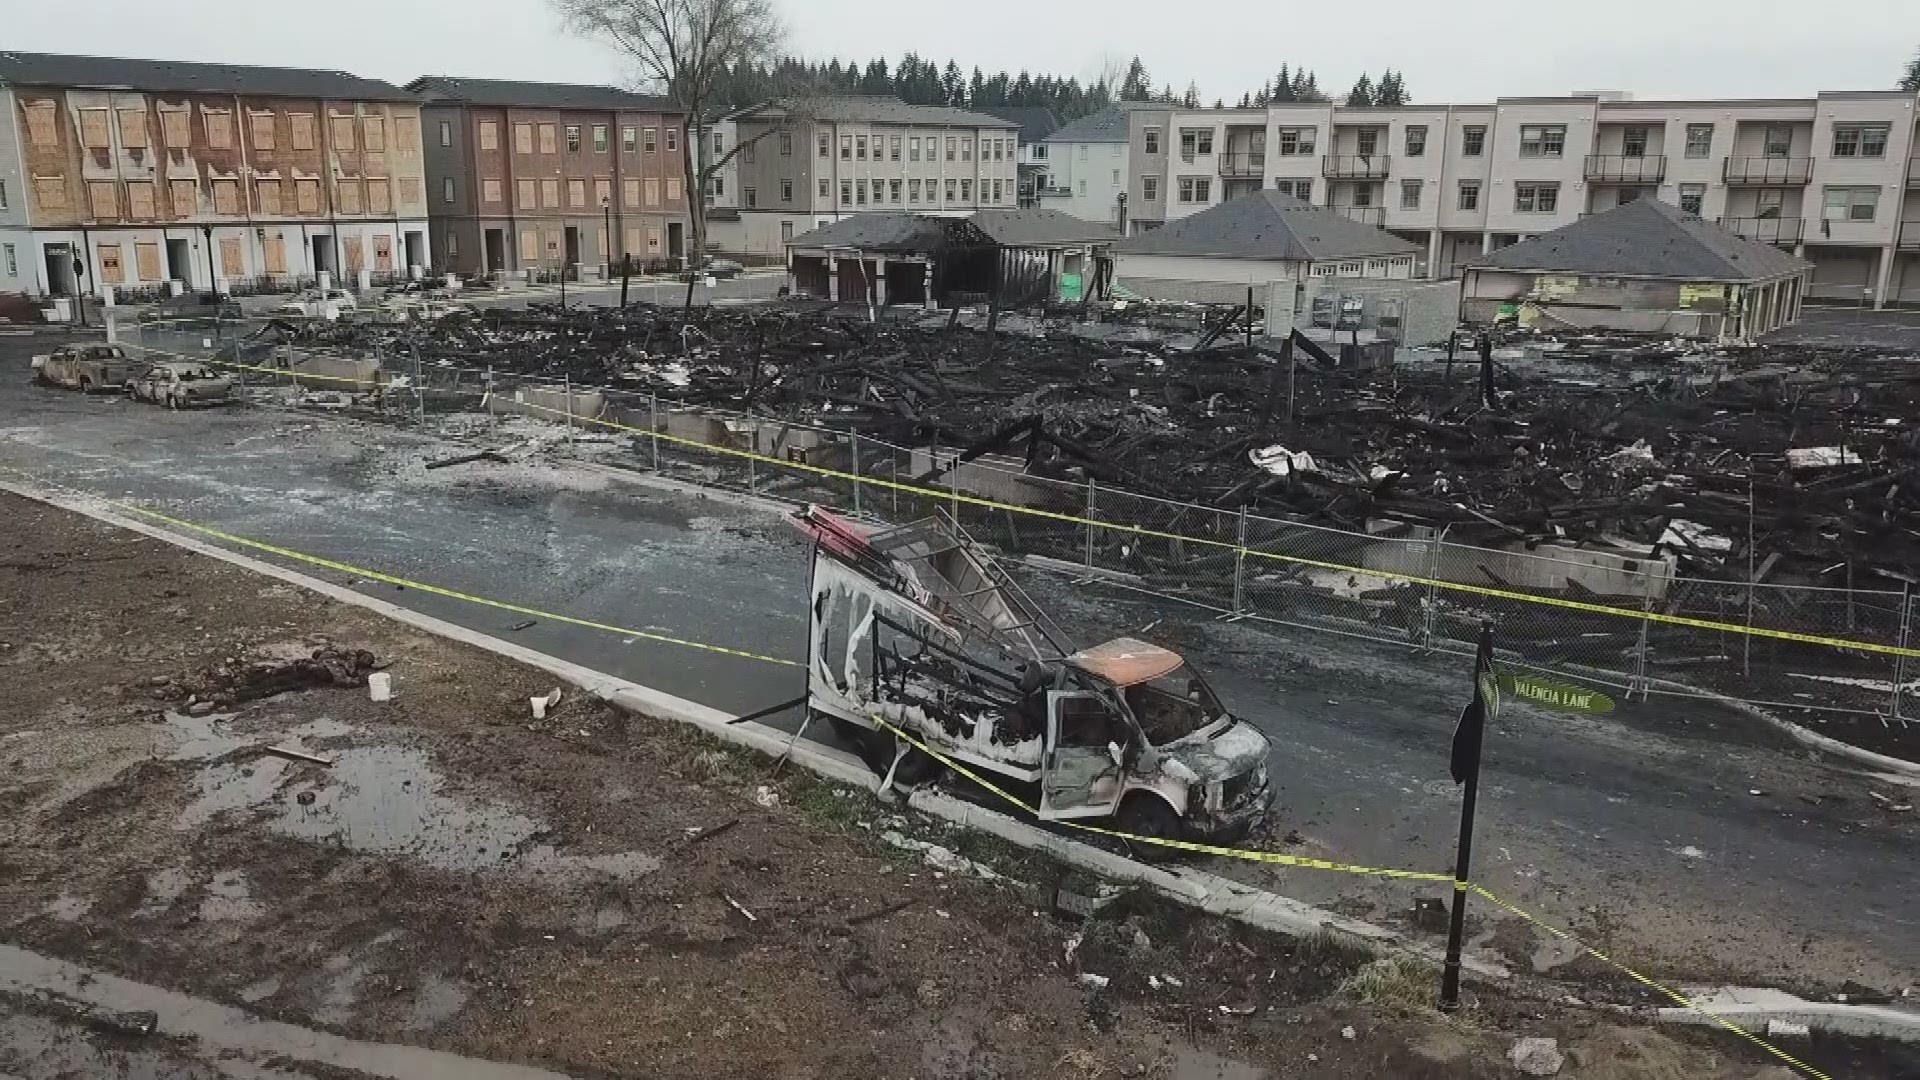 A blaze in the Villebois community of Wilsonville went from one alarm to three alarms in a matter of minutes. Twenty homes are no longer livable and about 14 cars and trucks were destroyed. Here's a look from our drone at the aftermath. More: https://on.kgw.com/2U7TsEk